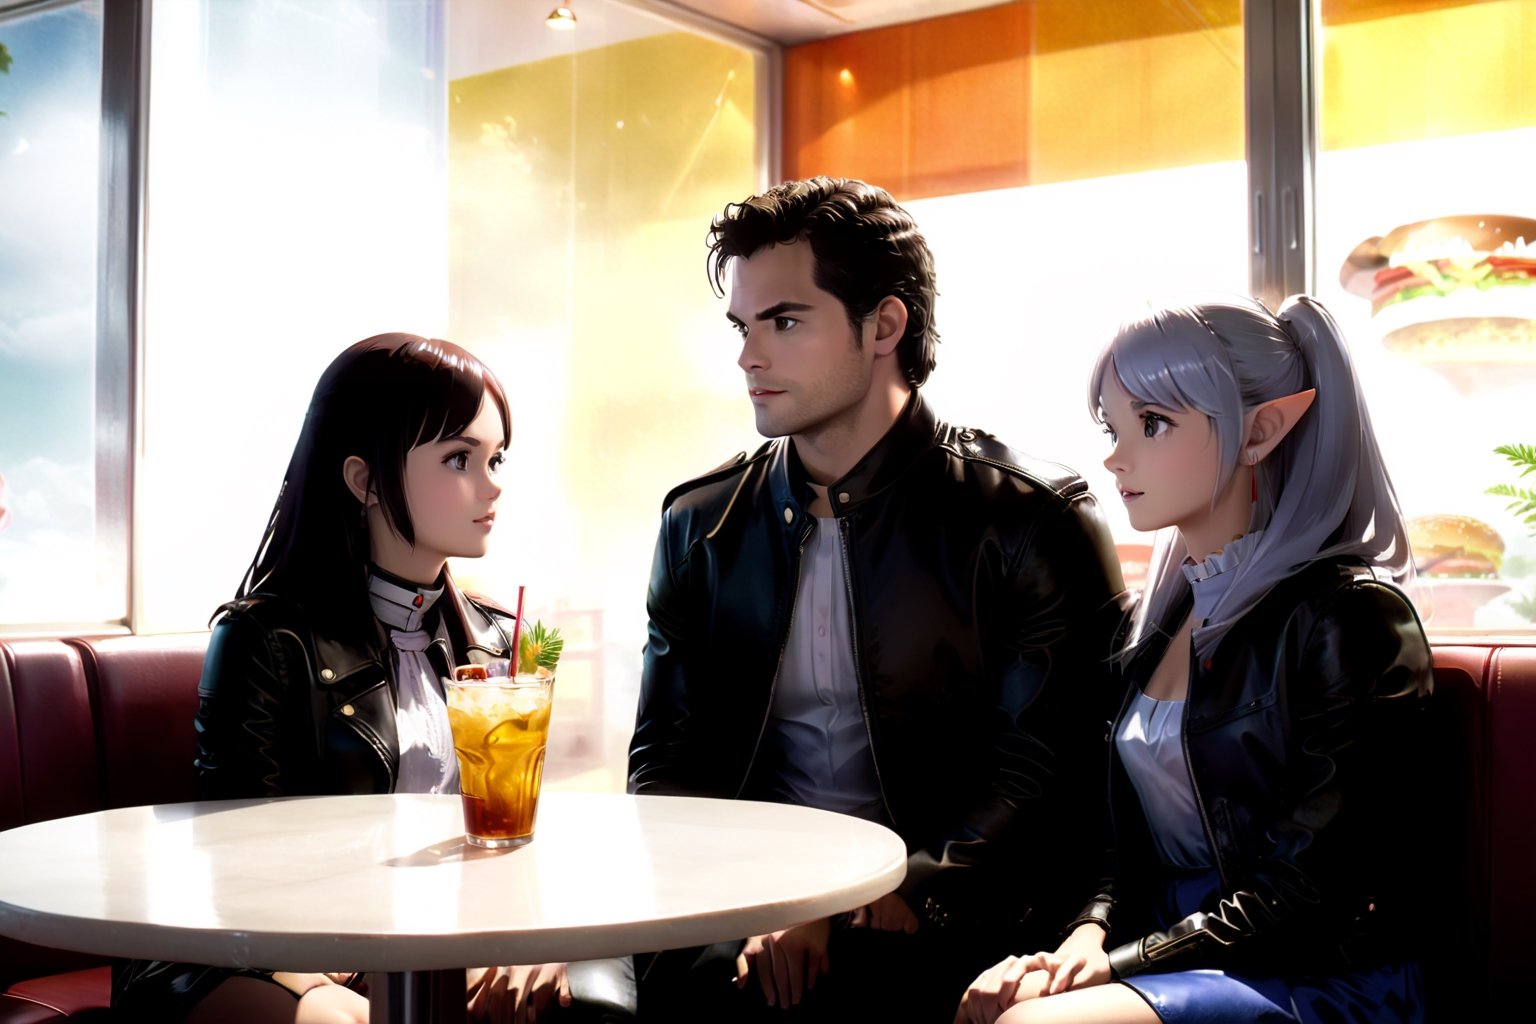 1boy(herny Cavill wearing leather jacket) with 2girls(frieren and fern both wearing nice dress), both sitting, hamburger and soda on the table, fantasy, (Shot from distance),background(indoor, fastfood restaurant)(masterpiece, highres, high quality:1.2), ambient occlusion, low saturation, High detailed, Detailedface, Dreamscape,frn